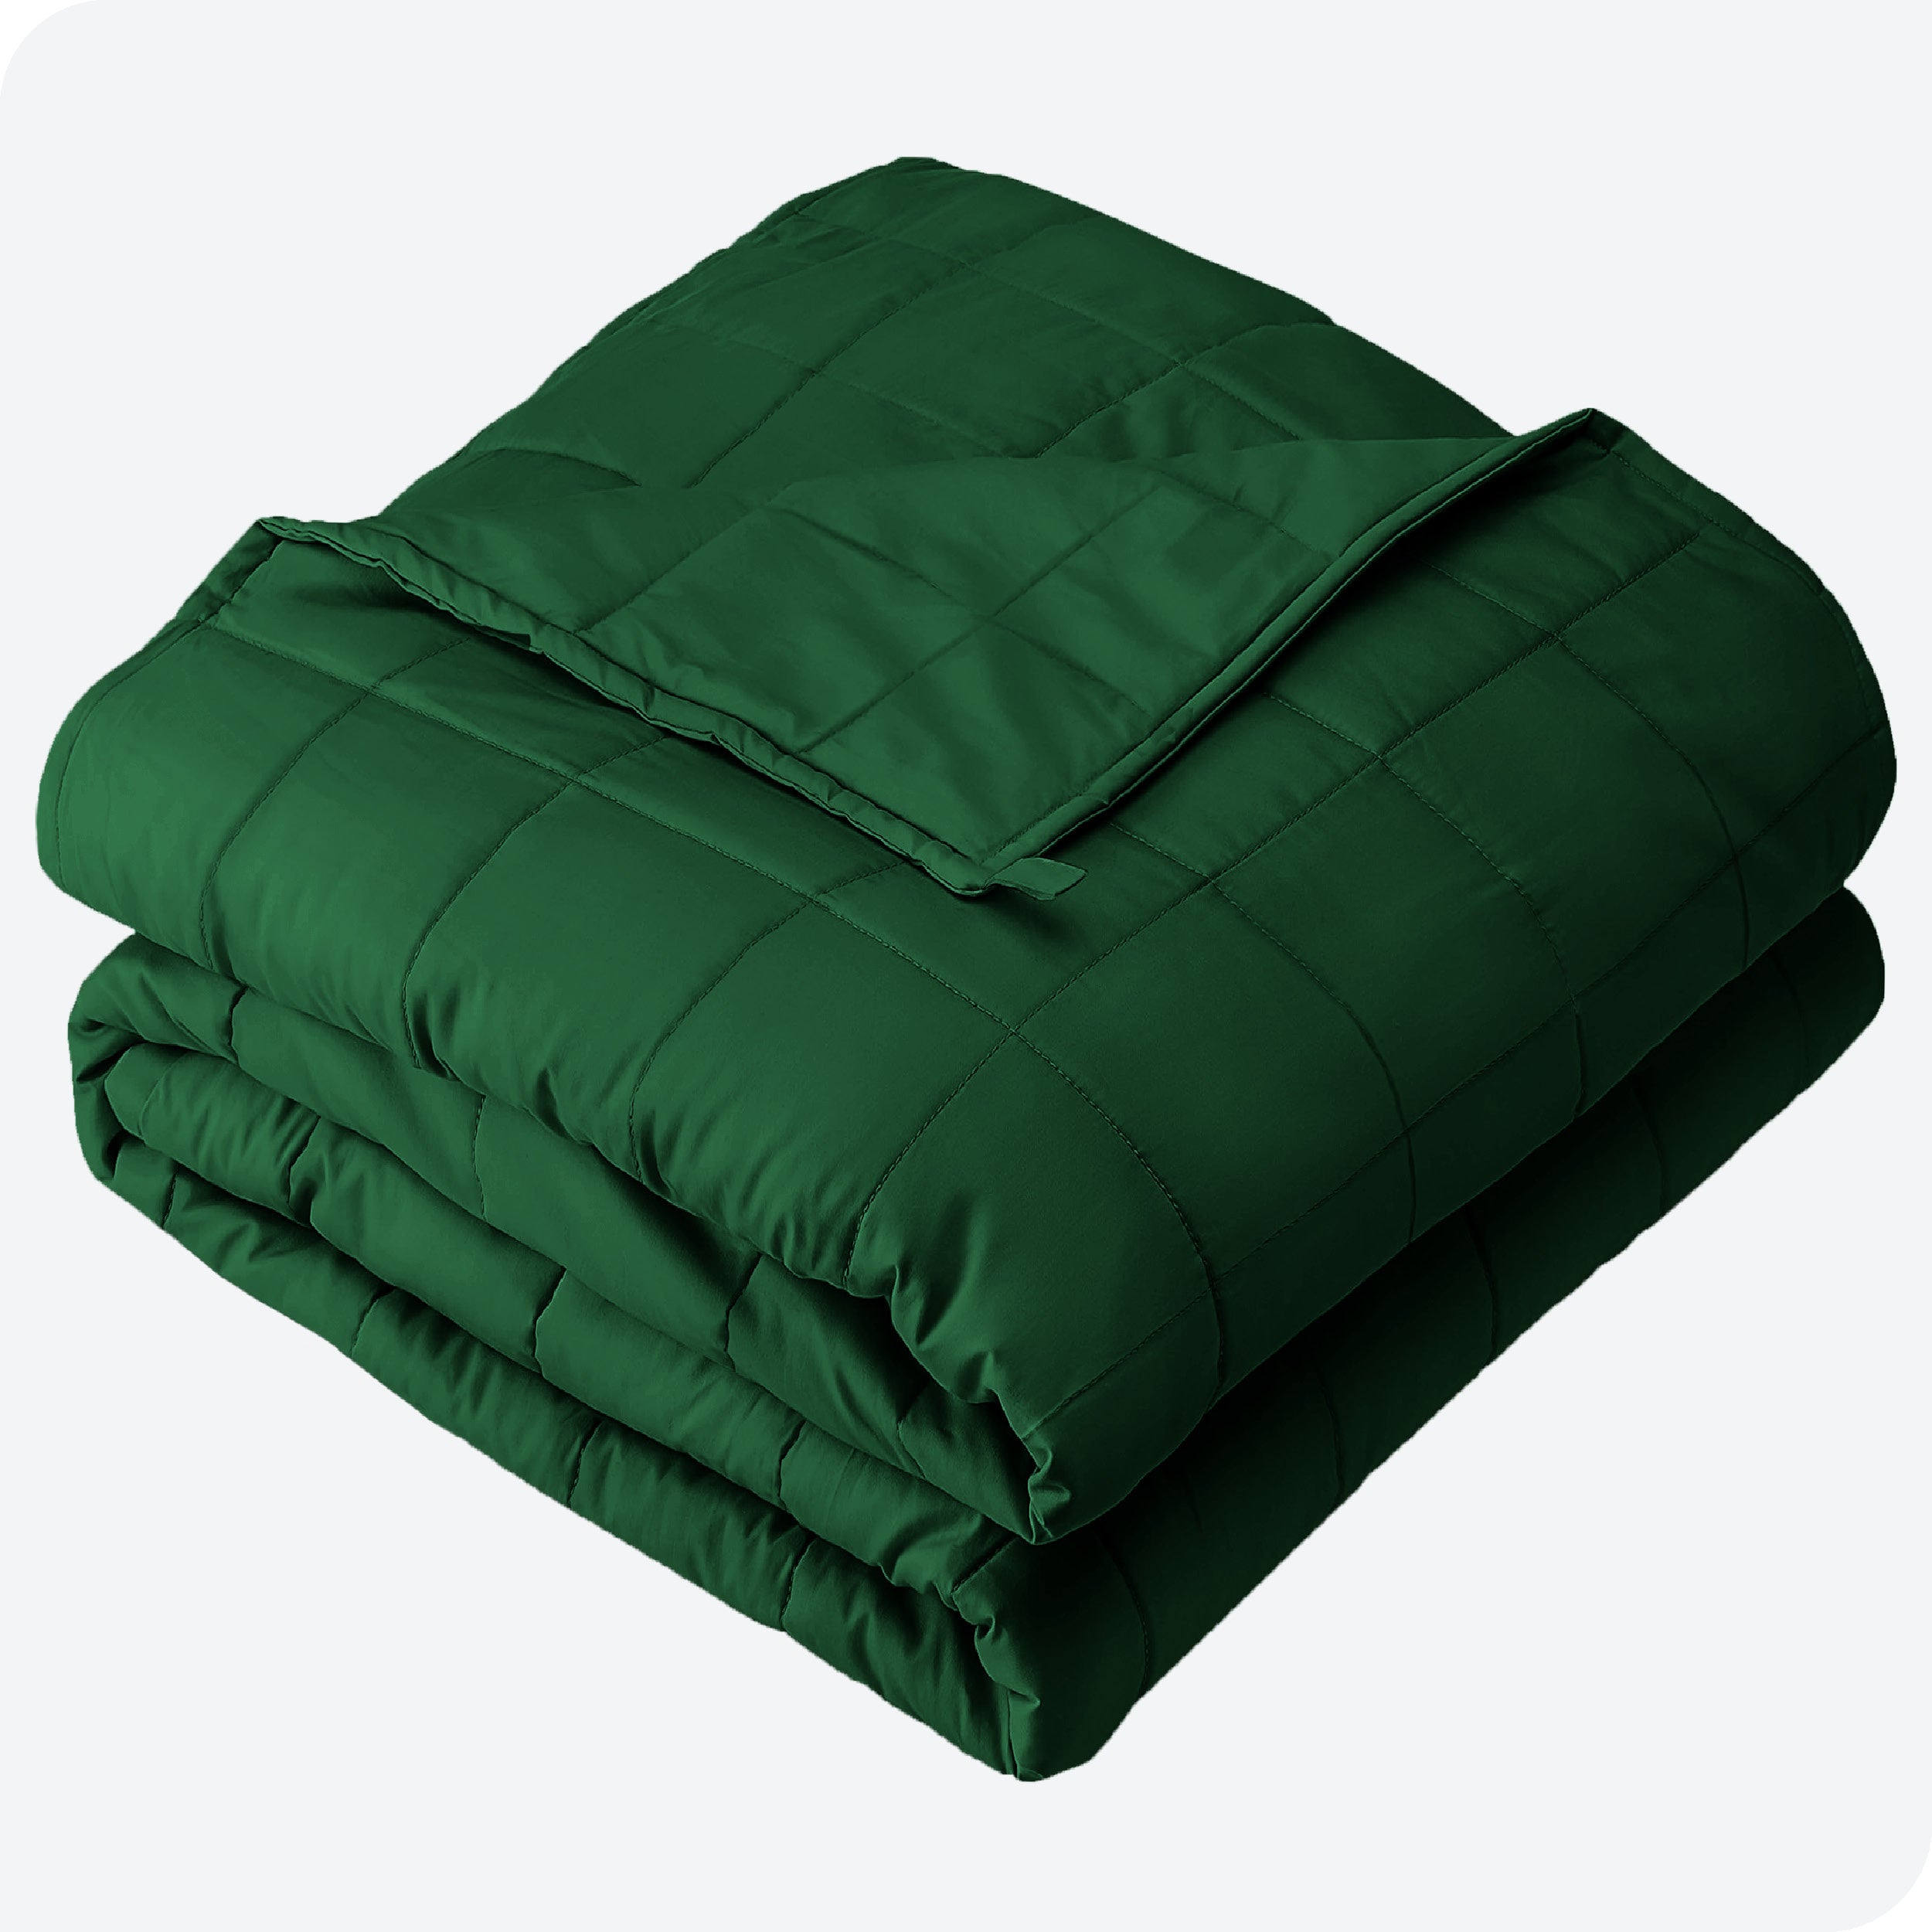 A folded cotton weighted blanket with a white background.